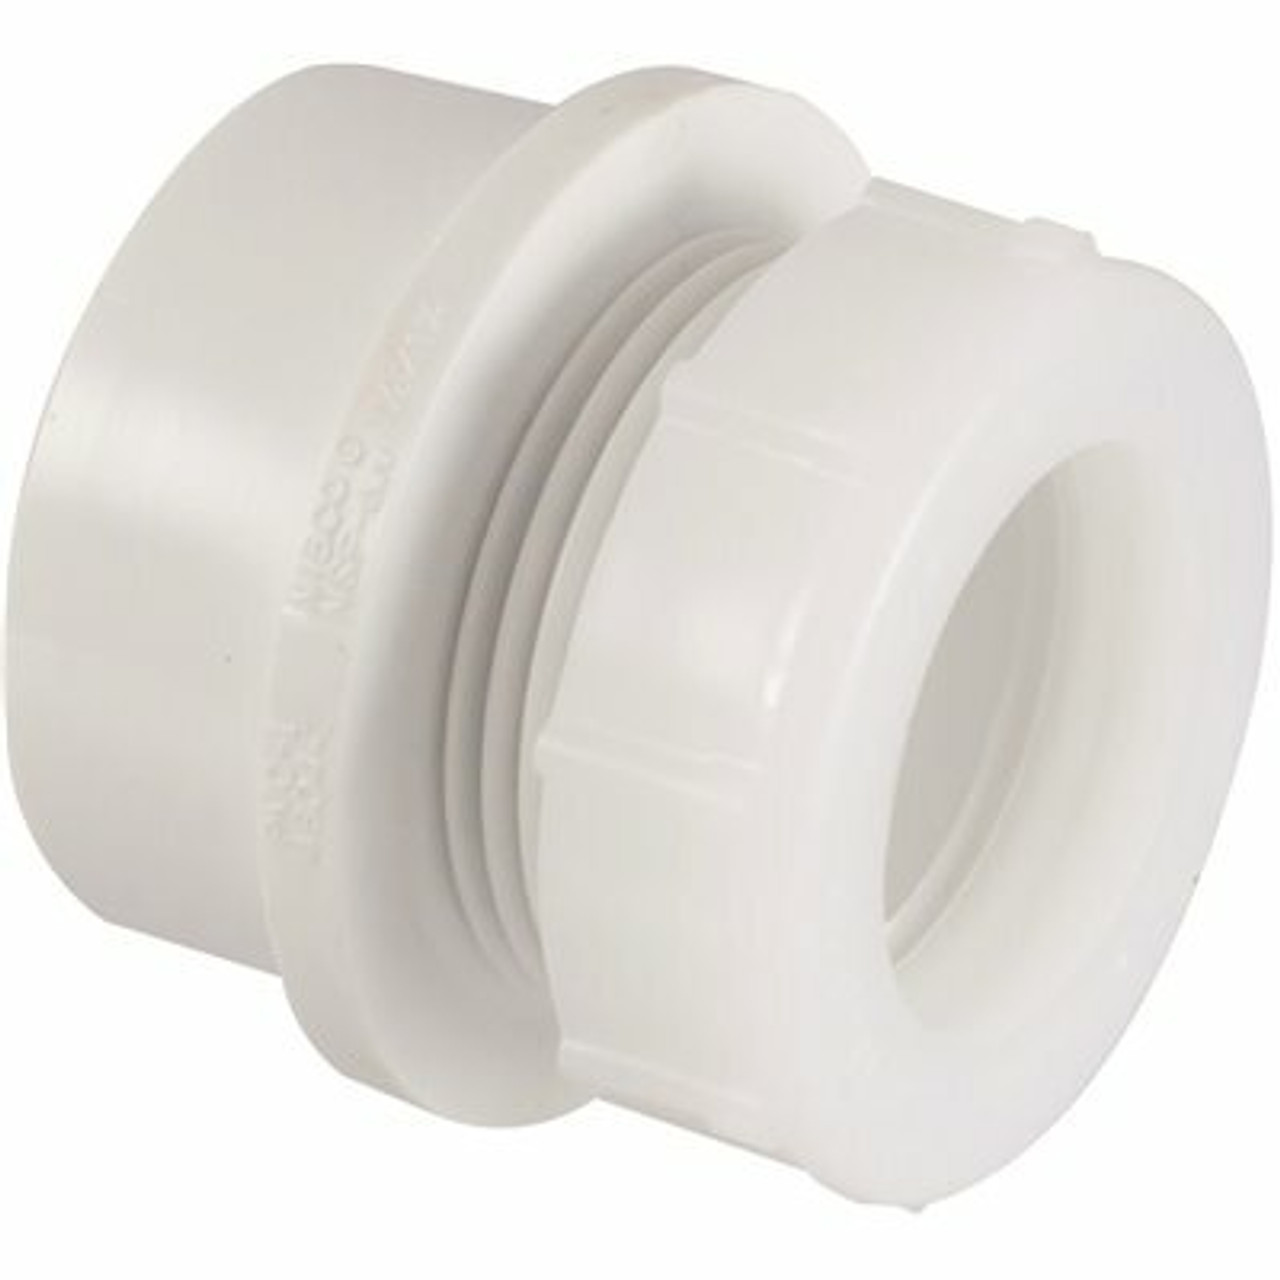 Nibco 1-1/2 X 1-1/4 In. Pvc Dwv Trap Adapter Fitting